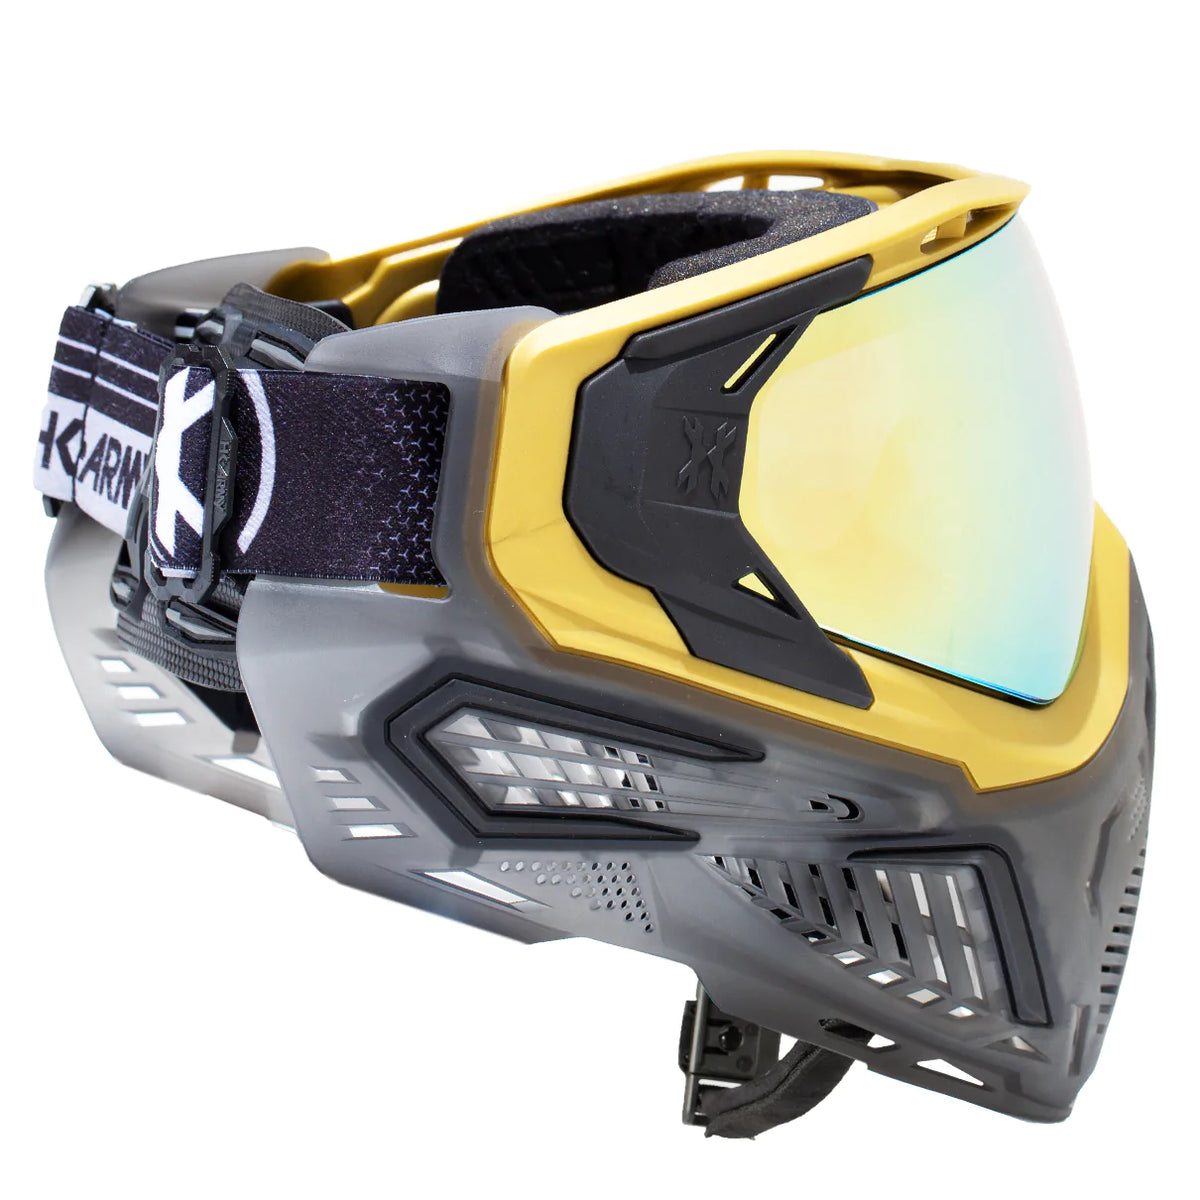 Slr Goggle - Alloy (Gold/Black/Smoke) Gold Lens | Paintball Goggle | Mask | Hk Army